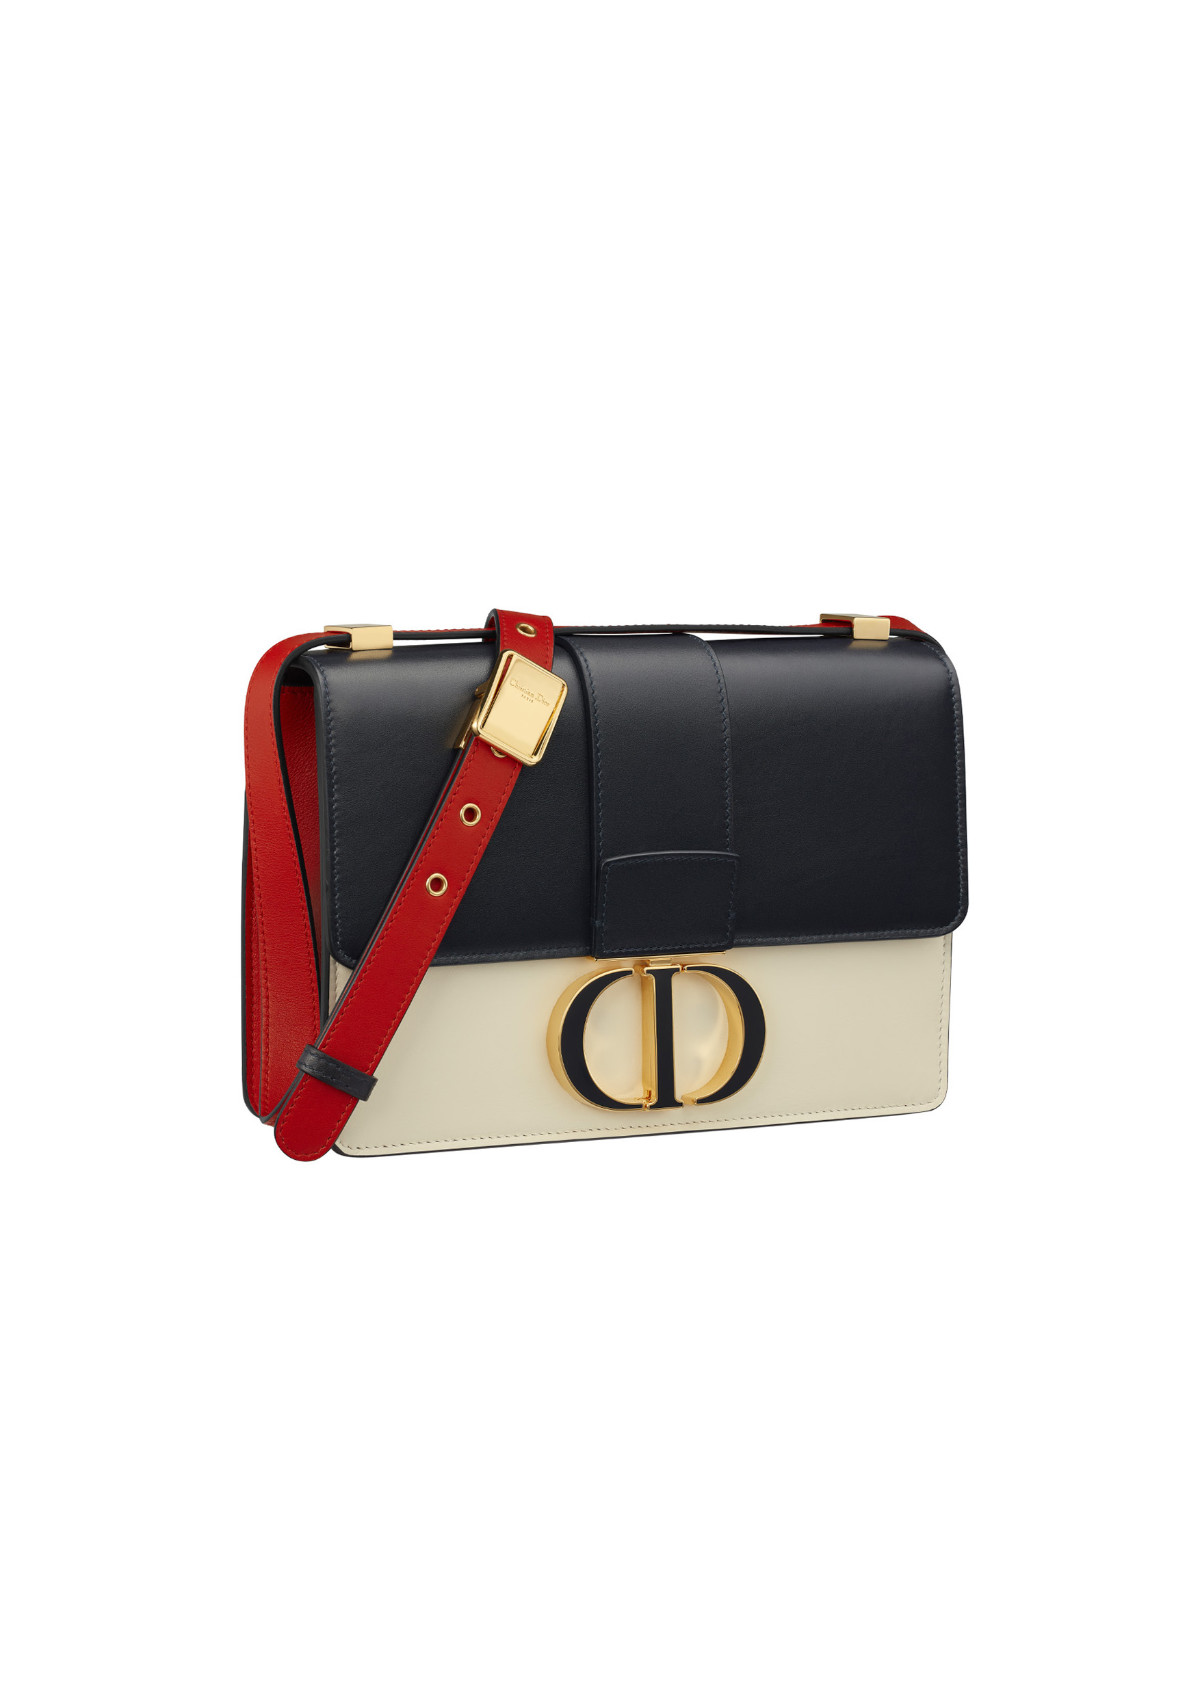 Dior Women Fall-Winter 2021-22 Collection - Bags